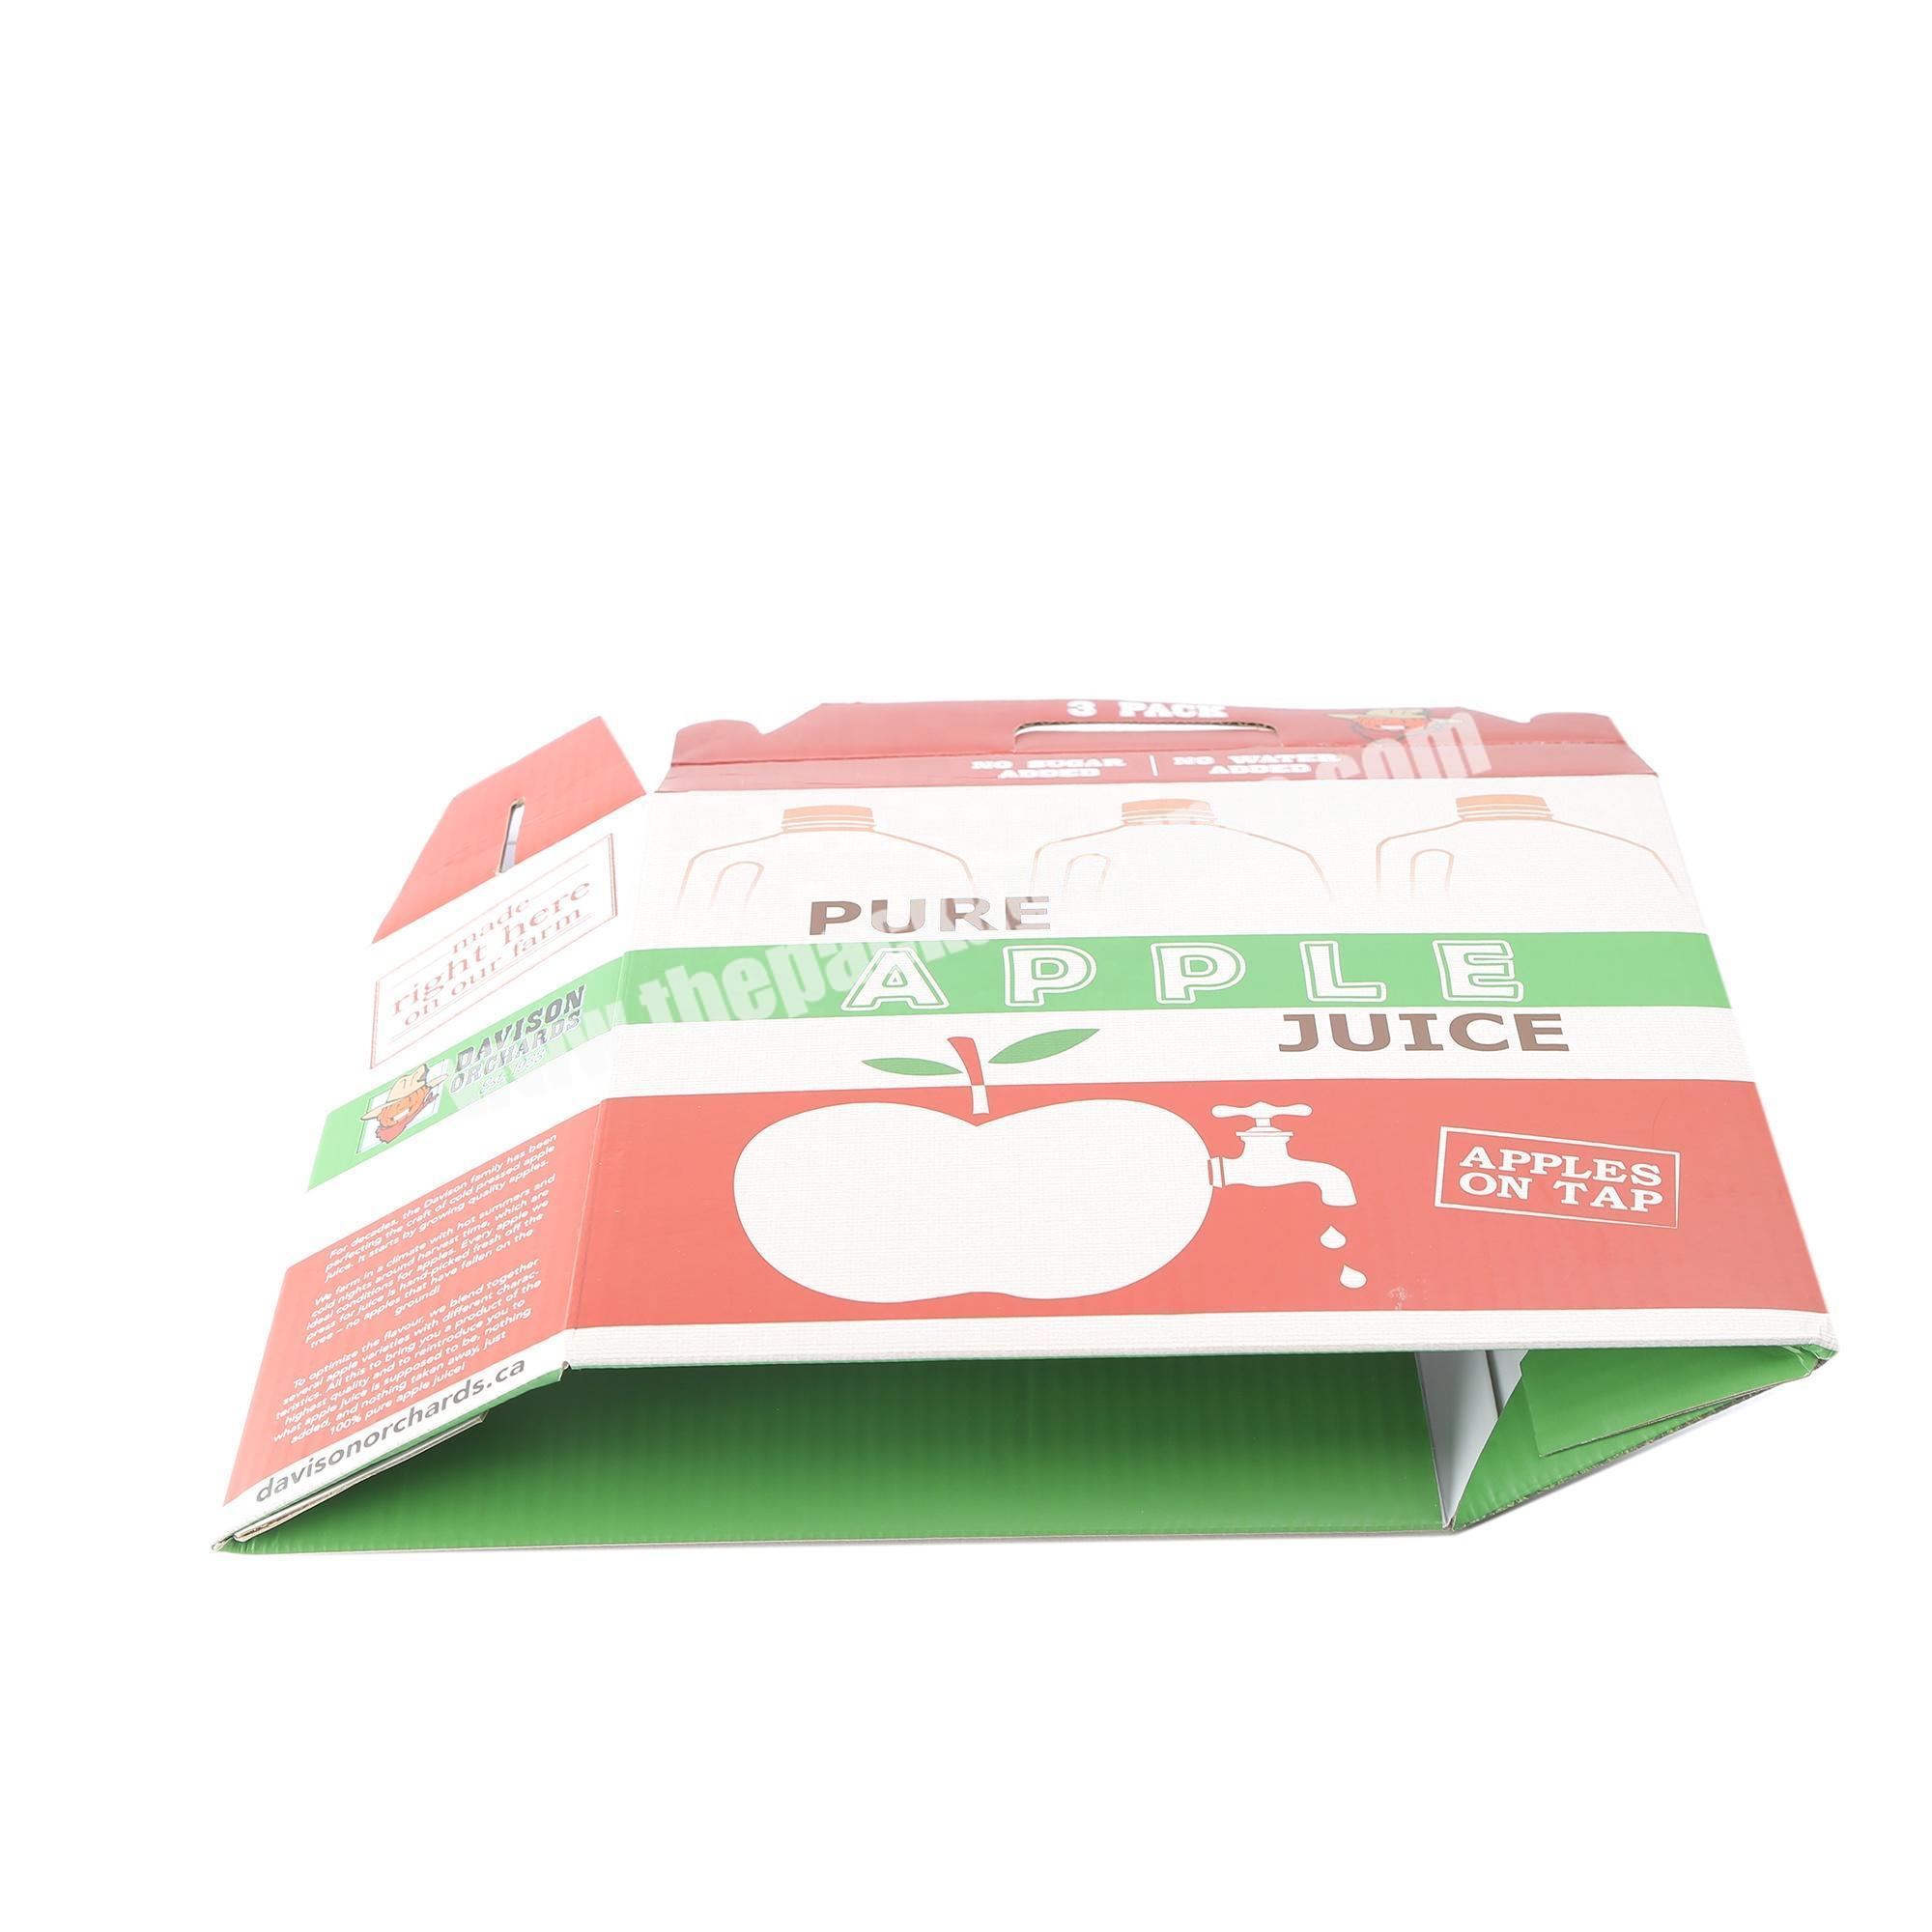 Green cute folding cookie biscuit packaging coated paper box with Custom printing